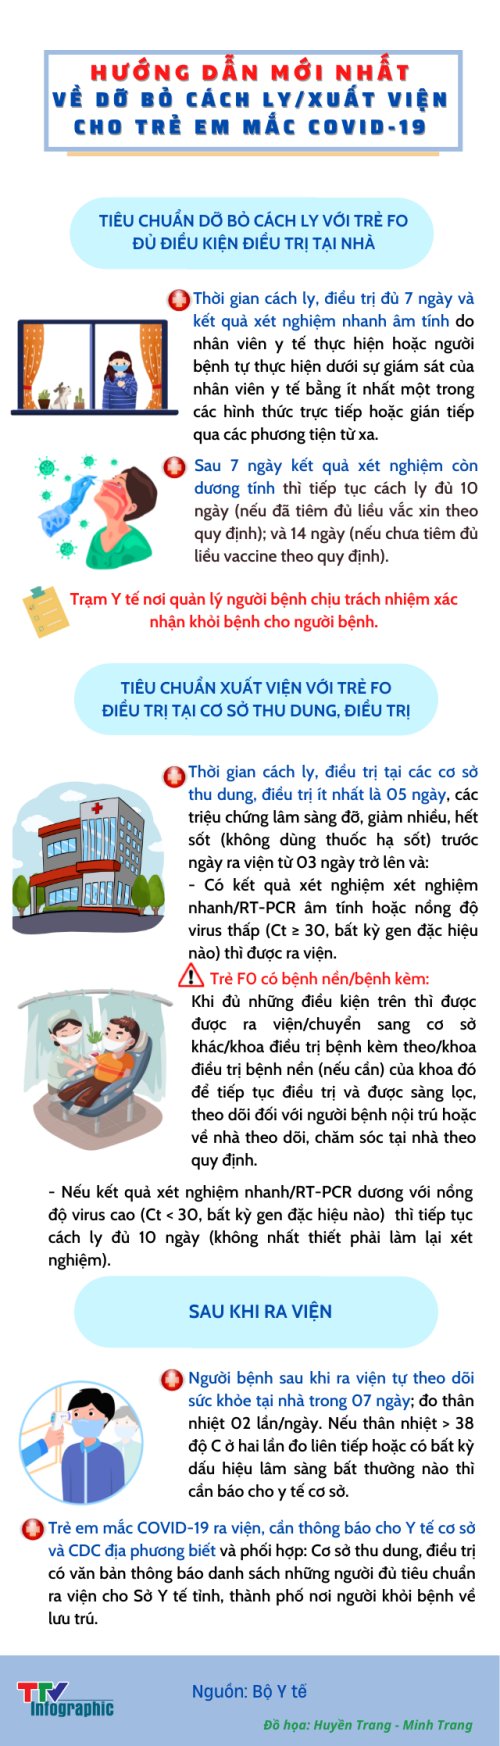 images5743928_huong_dan_do_bo_cach_ly.png